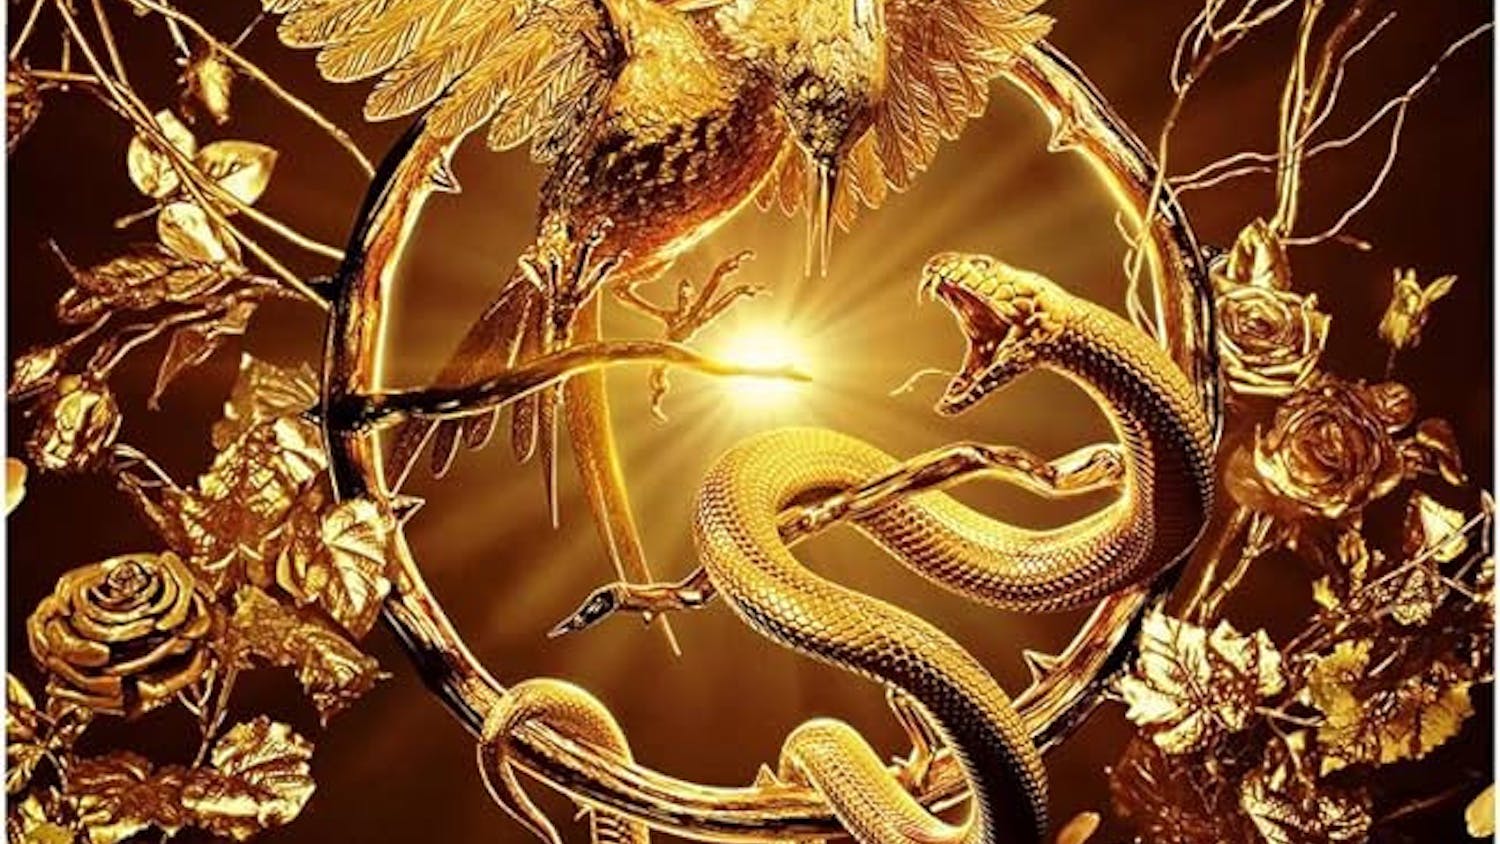 The "Hunger Games" prequel based on Suzanne Collins' 2020 novel was released in theaters on Nov. 17.&nbsp;